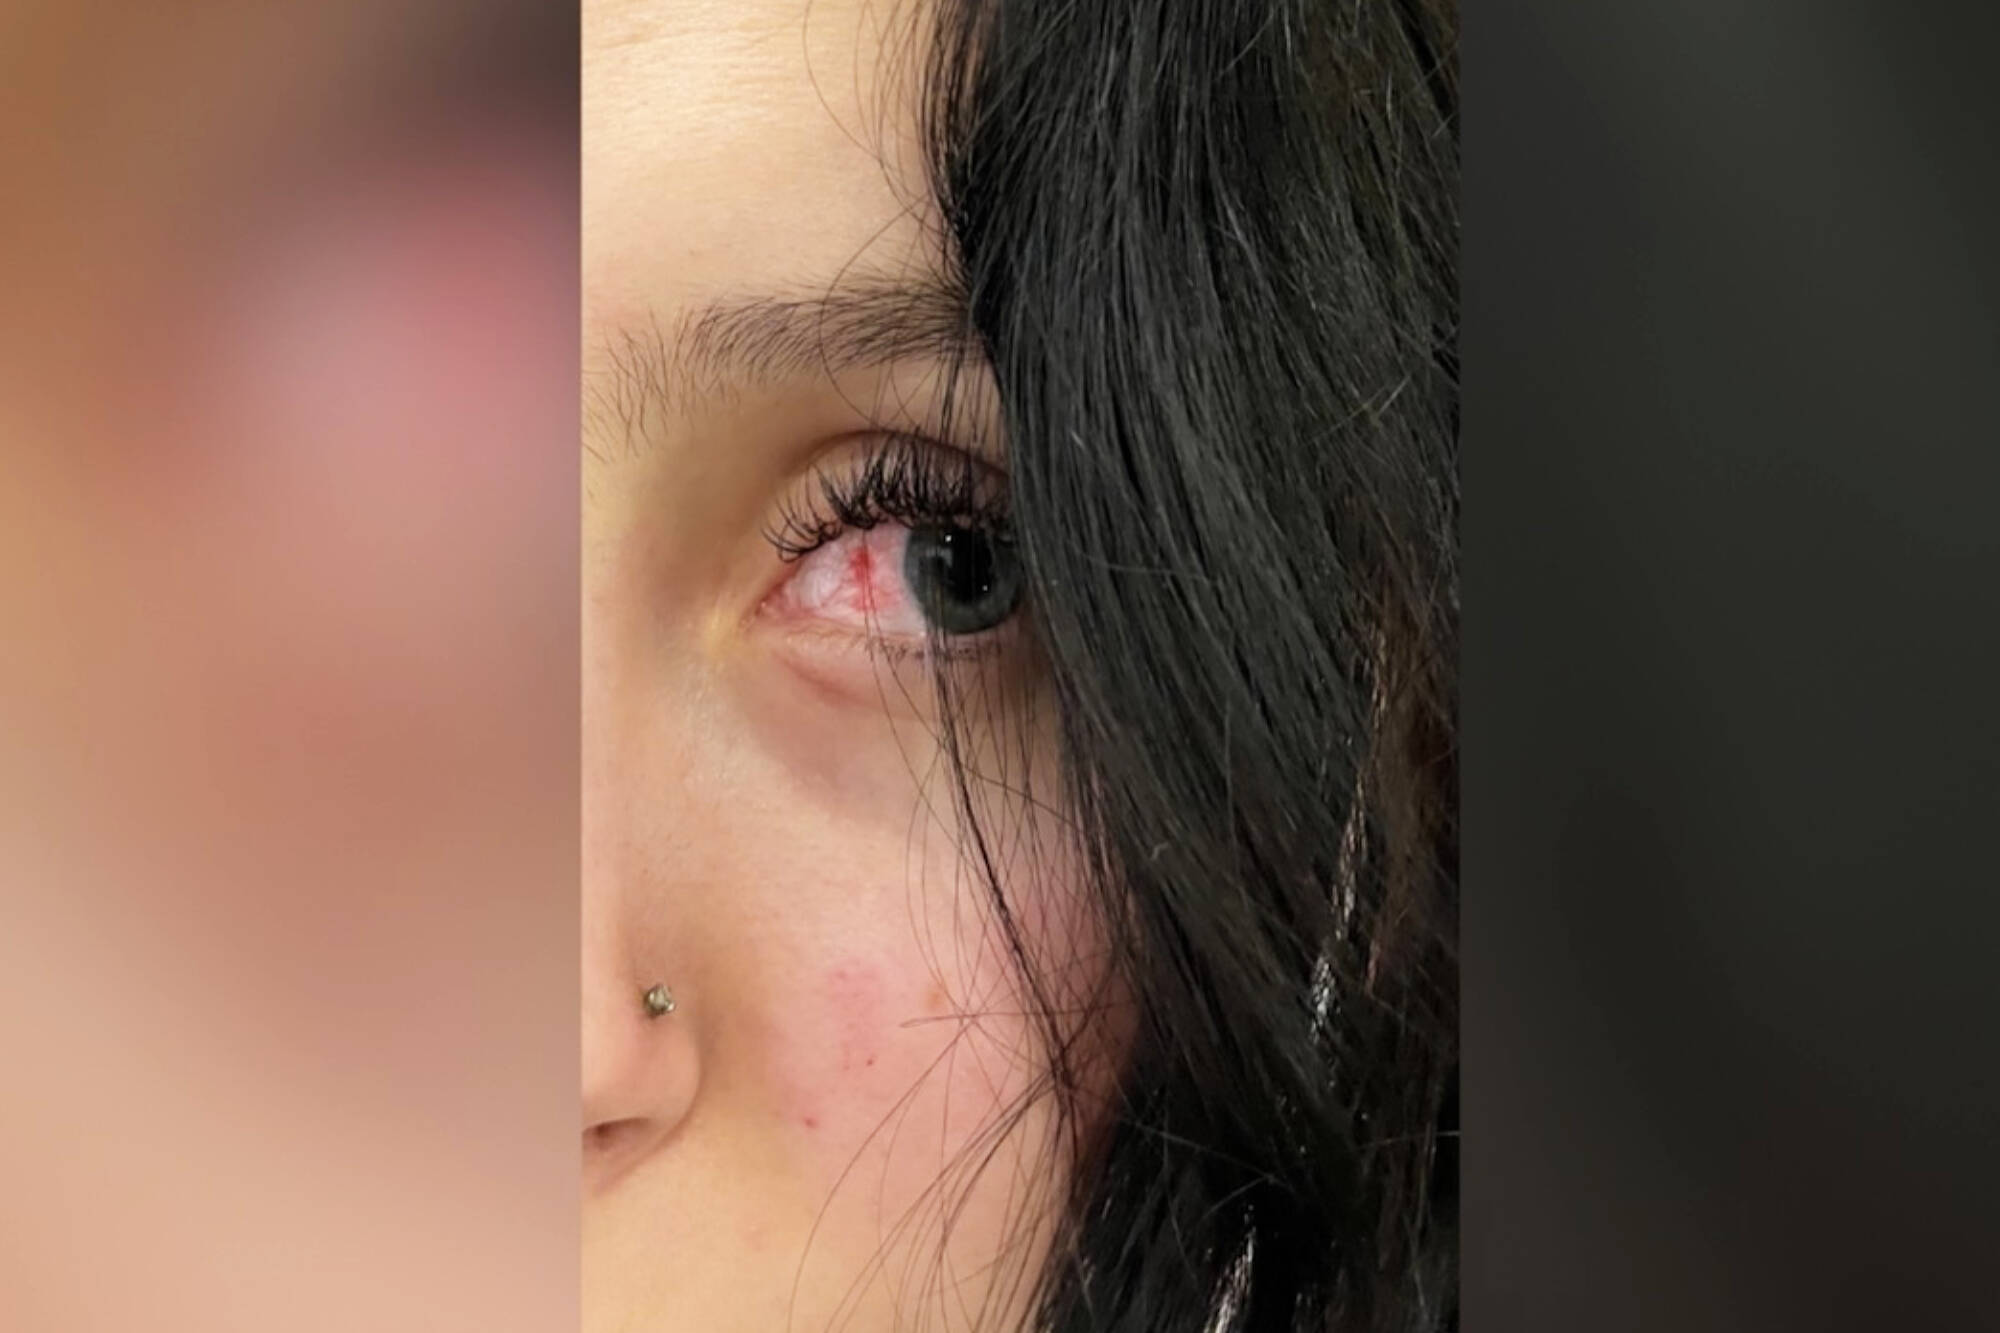 Jayda Koppel was expecting to develop a black eye, in addition to having a concussion and other injuries sustained after she and a friend were allegedly assaulted by an unknown driver in Silver Creek on Wednesday, March 8, 2023. (Jayda Koppel photo)